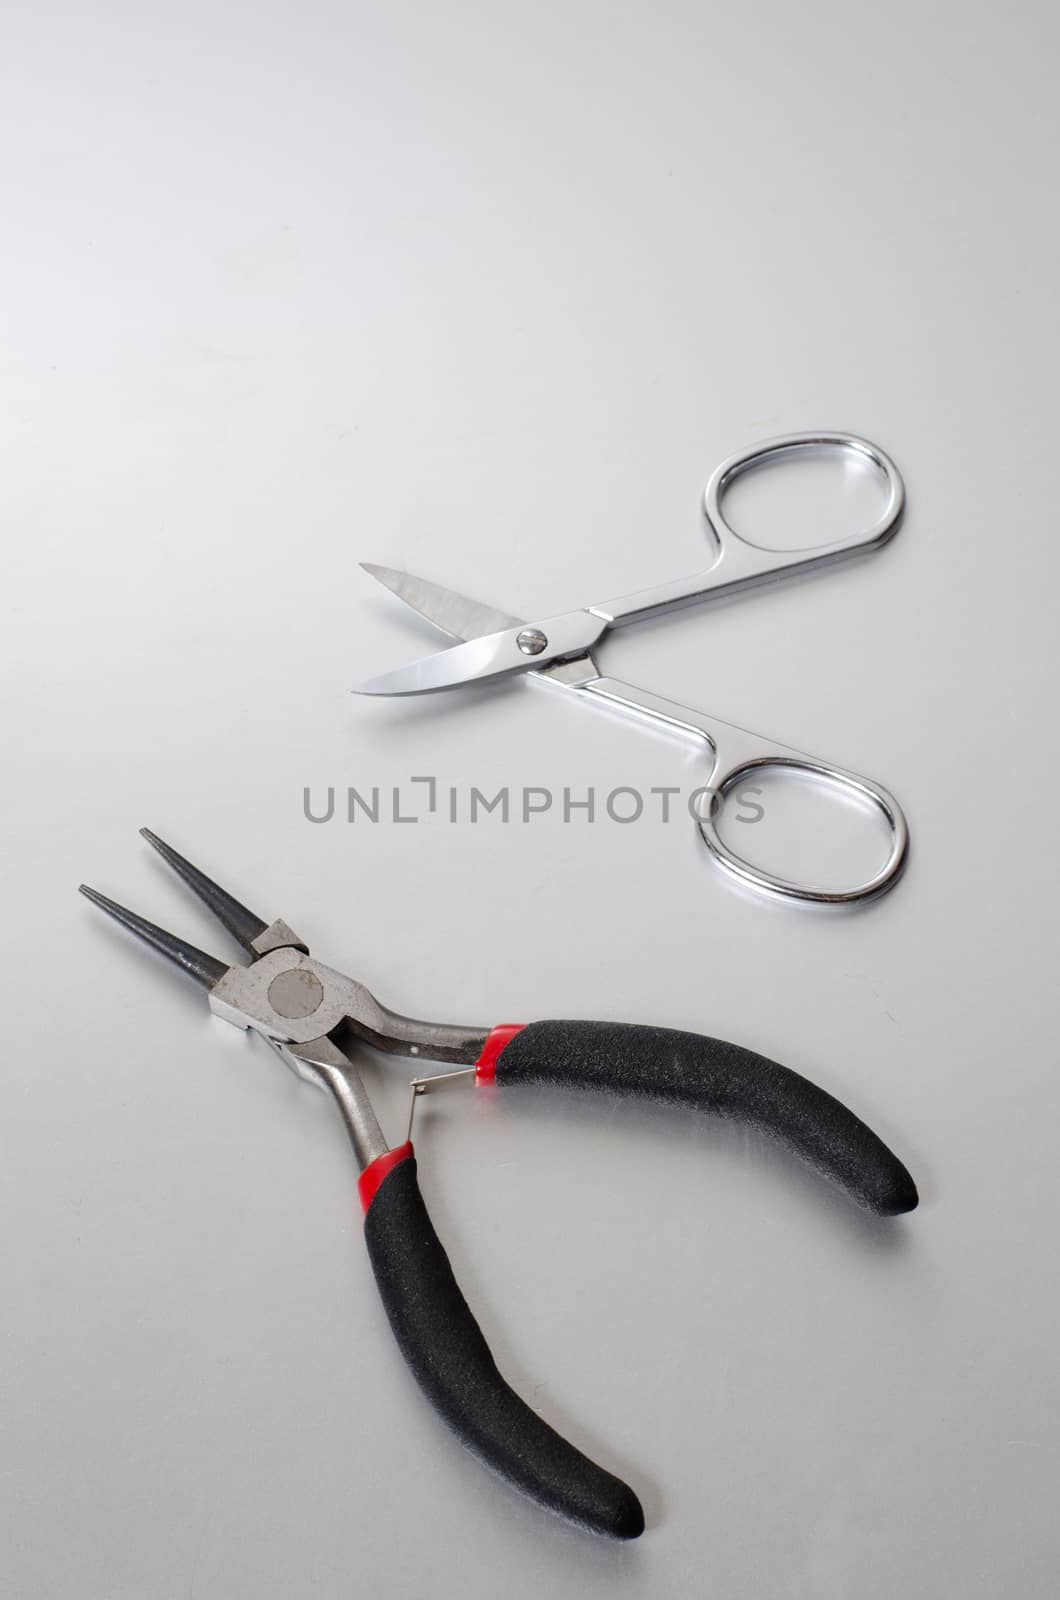 pliers and scissors by sarkao